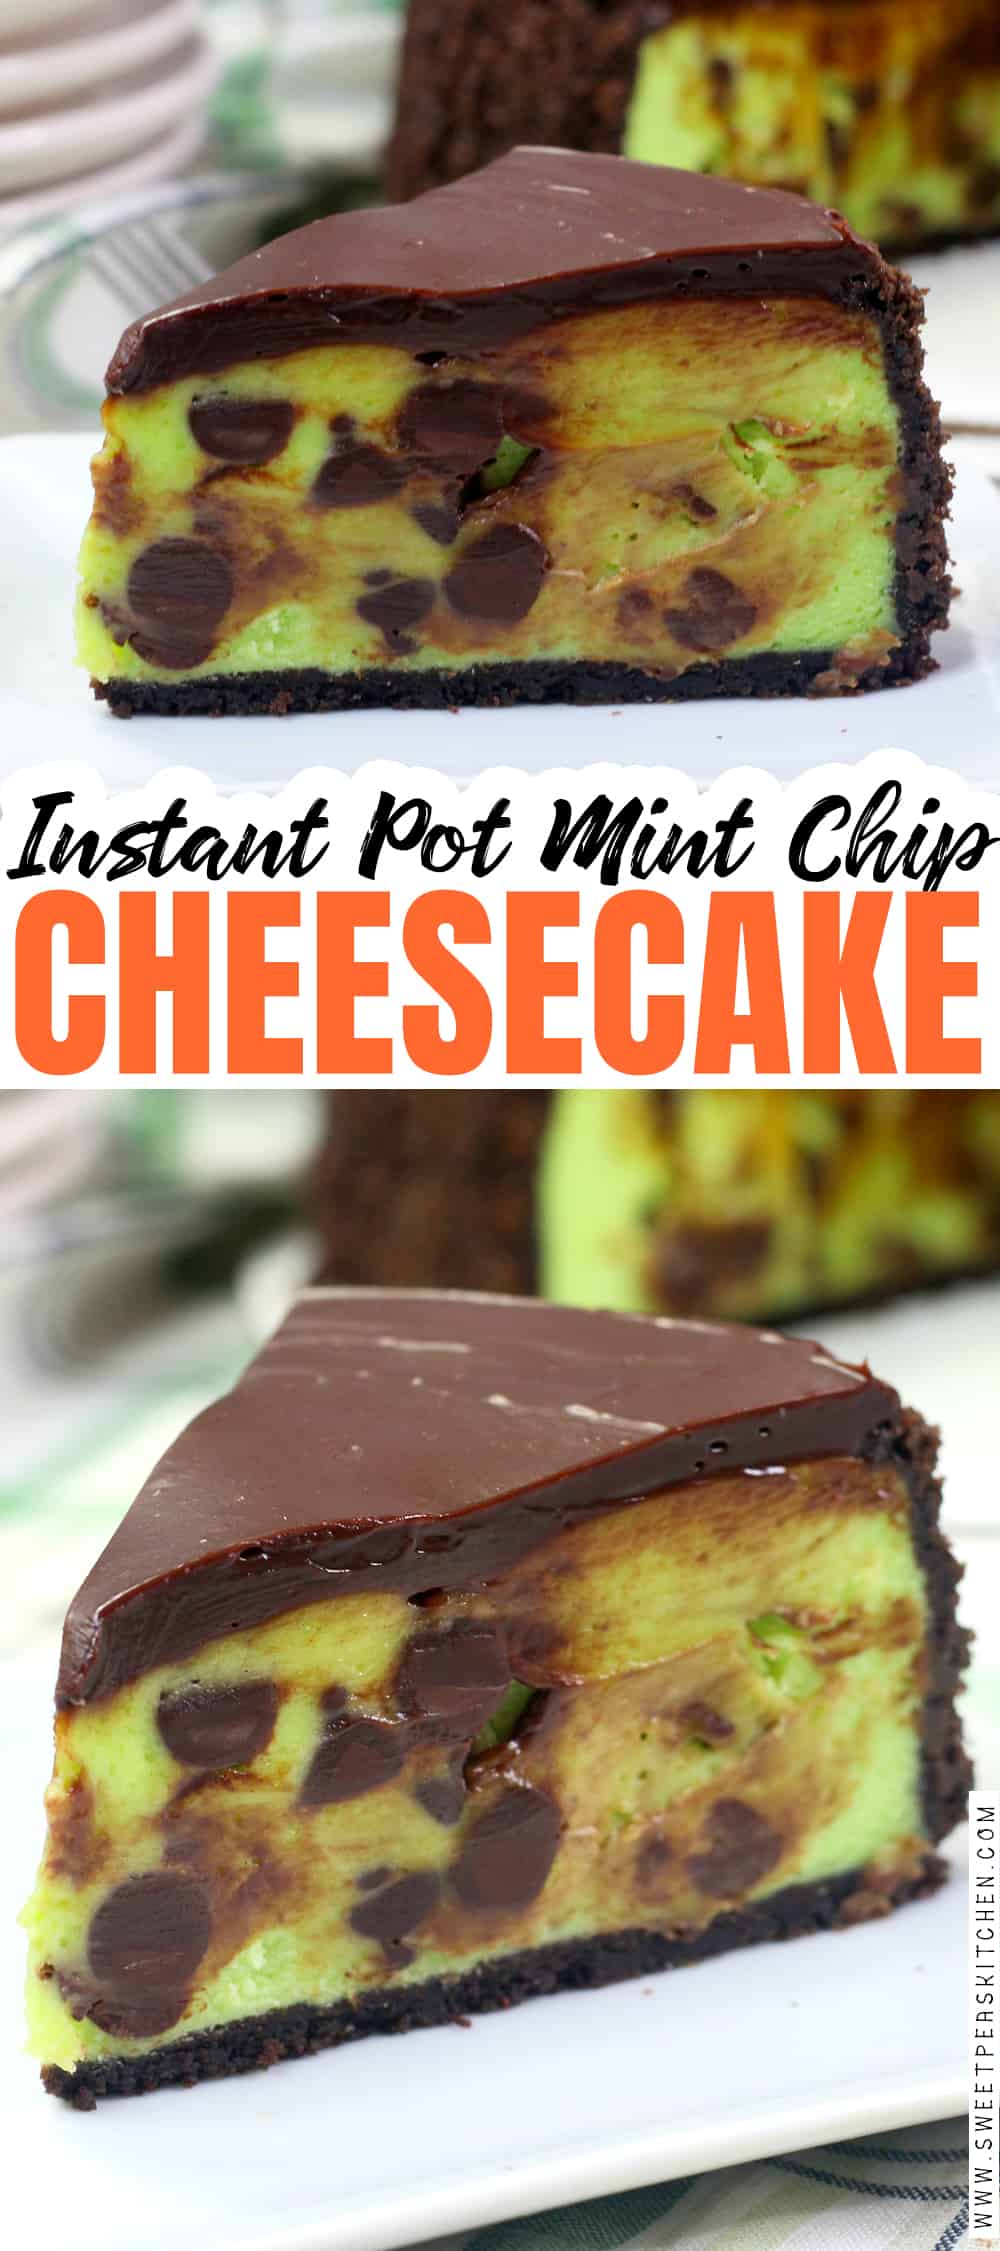 Instant Pot Mint Chip Cheesecake